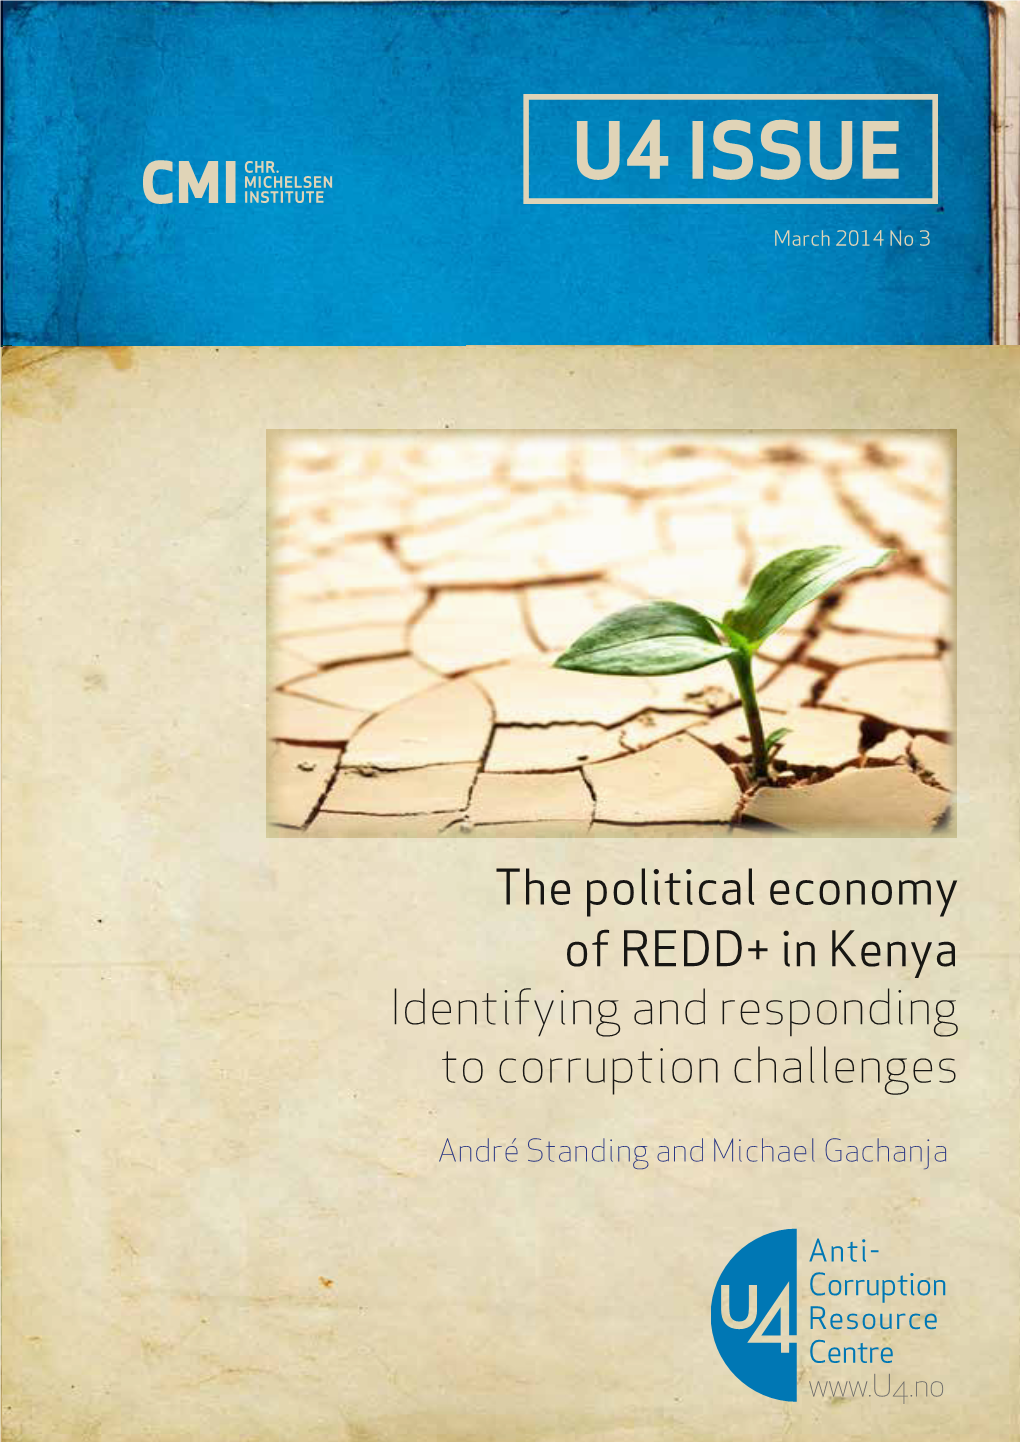 The Political Economy of REDD+ in Kenya Identifying and Responding to Corruption Challenges